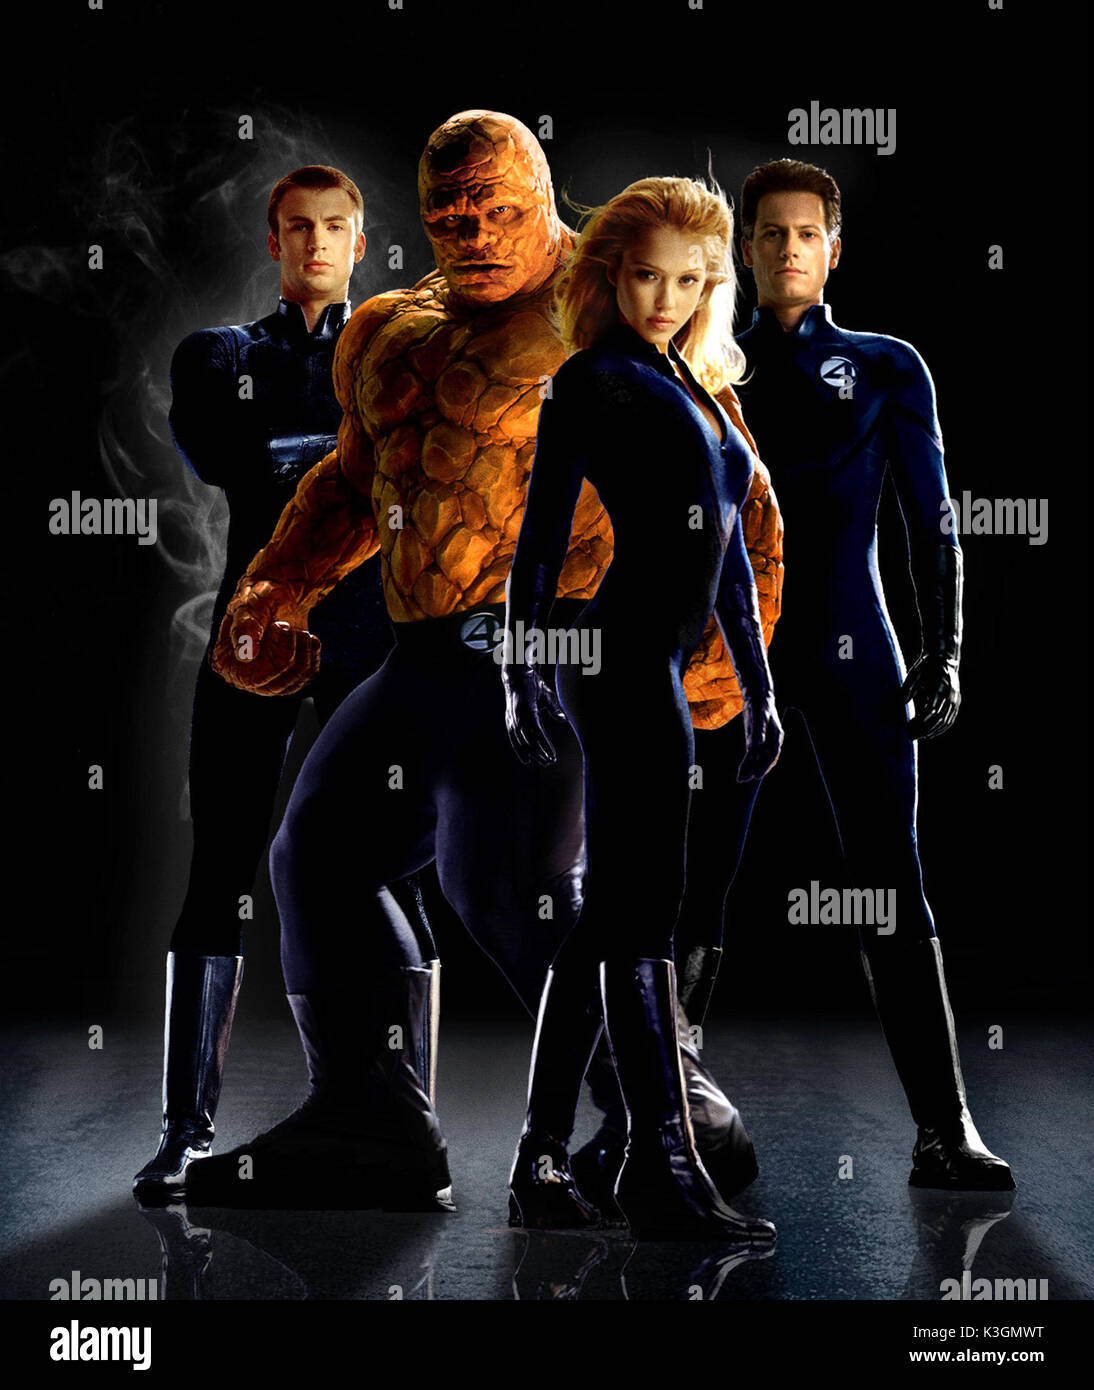 Please contact the Twentieth Century Fox press office for further information. FANTASTIC FOUR CHRIS EVANS as The Human Torch, MICHAEL CHIKLIS as The Thing, JESSICA ALBA as The Invisible Woman, IOAN GRUFFUDD as Mr. Fantastic     Date: 2005 Stock Photo